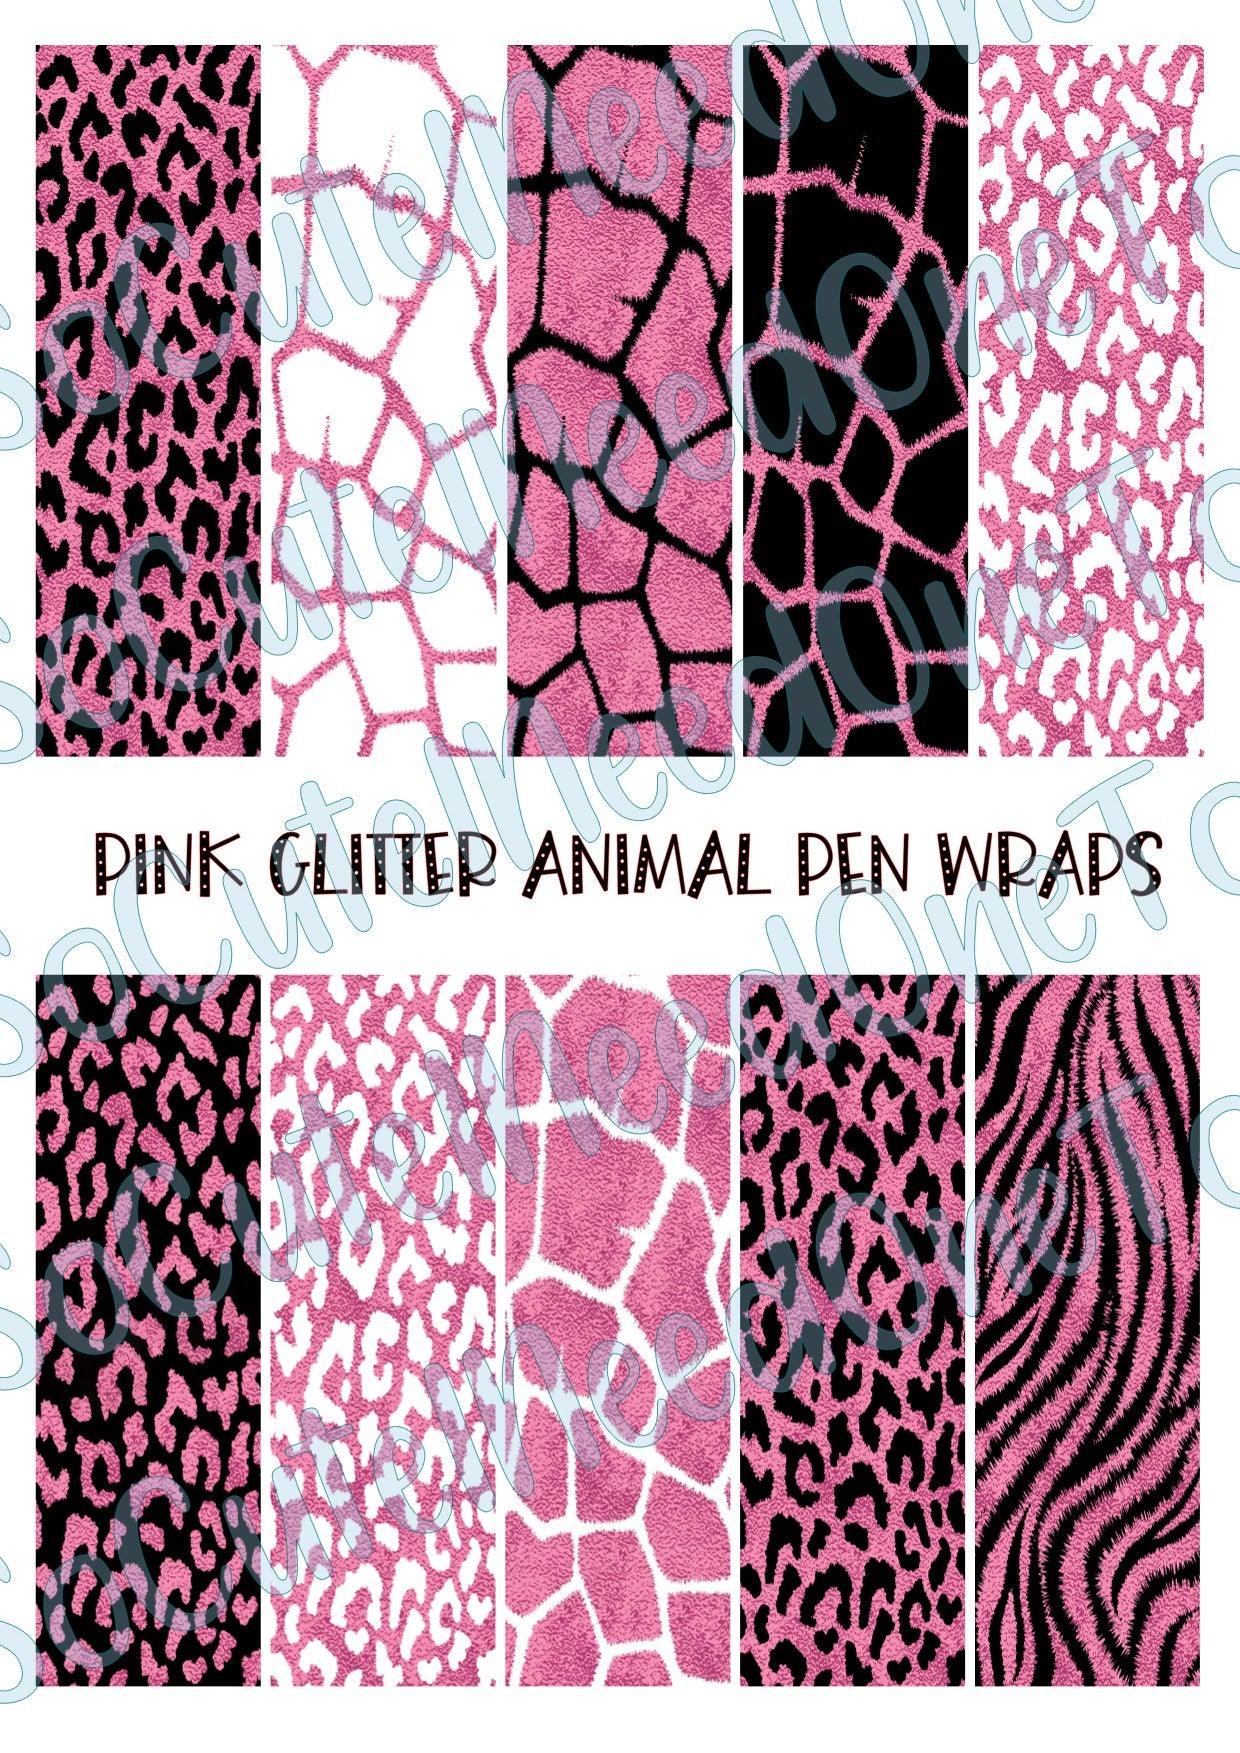 Pink Glitter Animal Skin Pen Wraps on Clear/White Waterslide Paper Ready To Use - SoCuteINeedOneToo